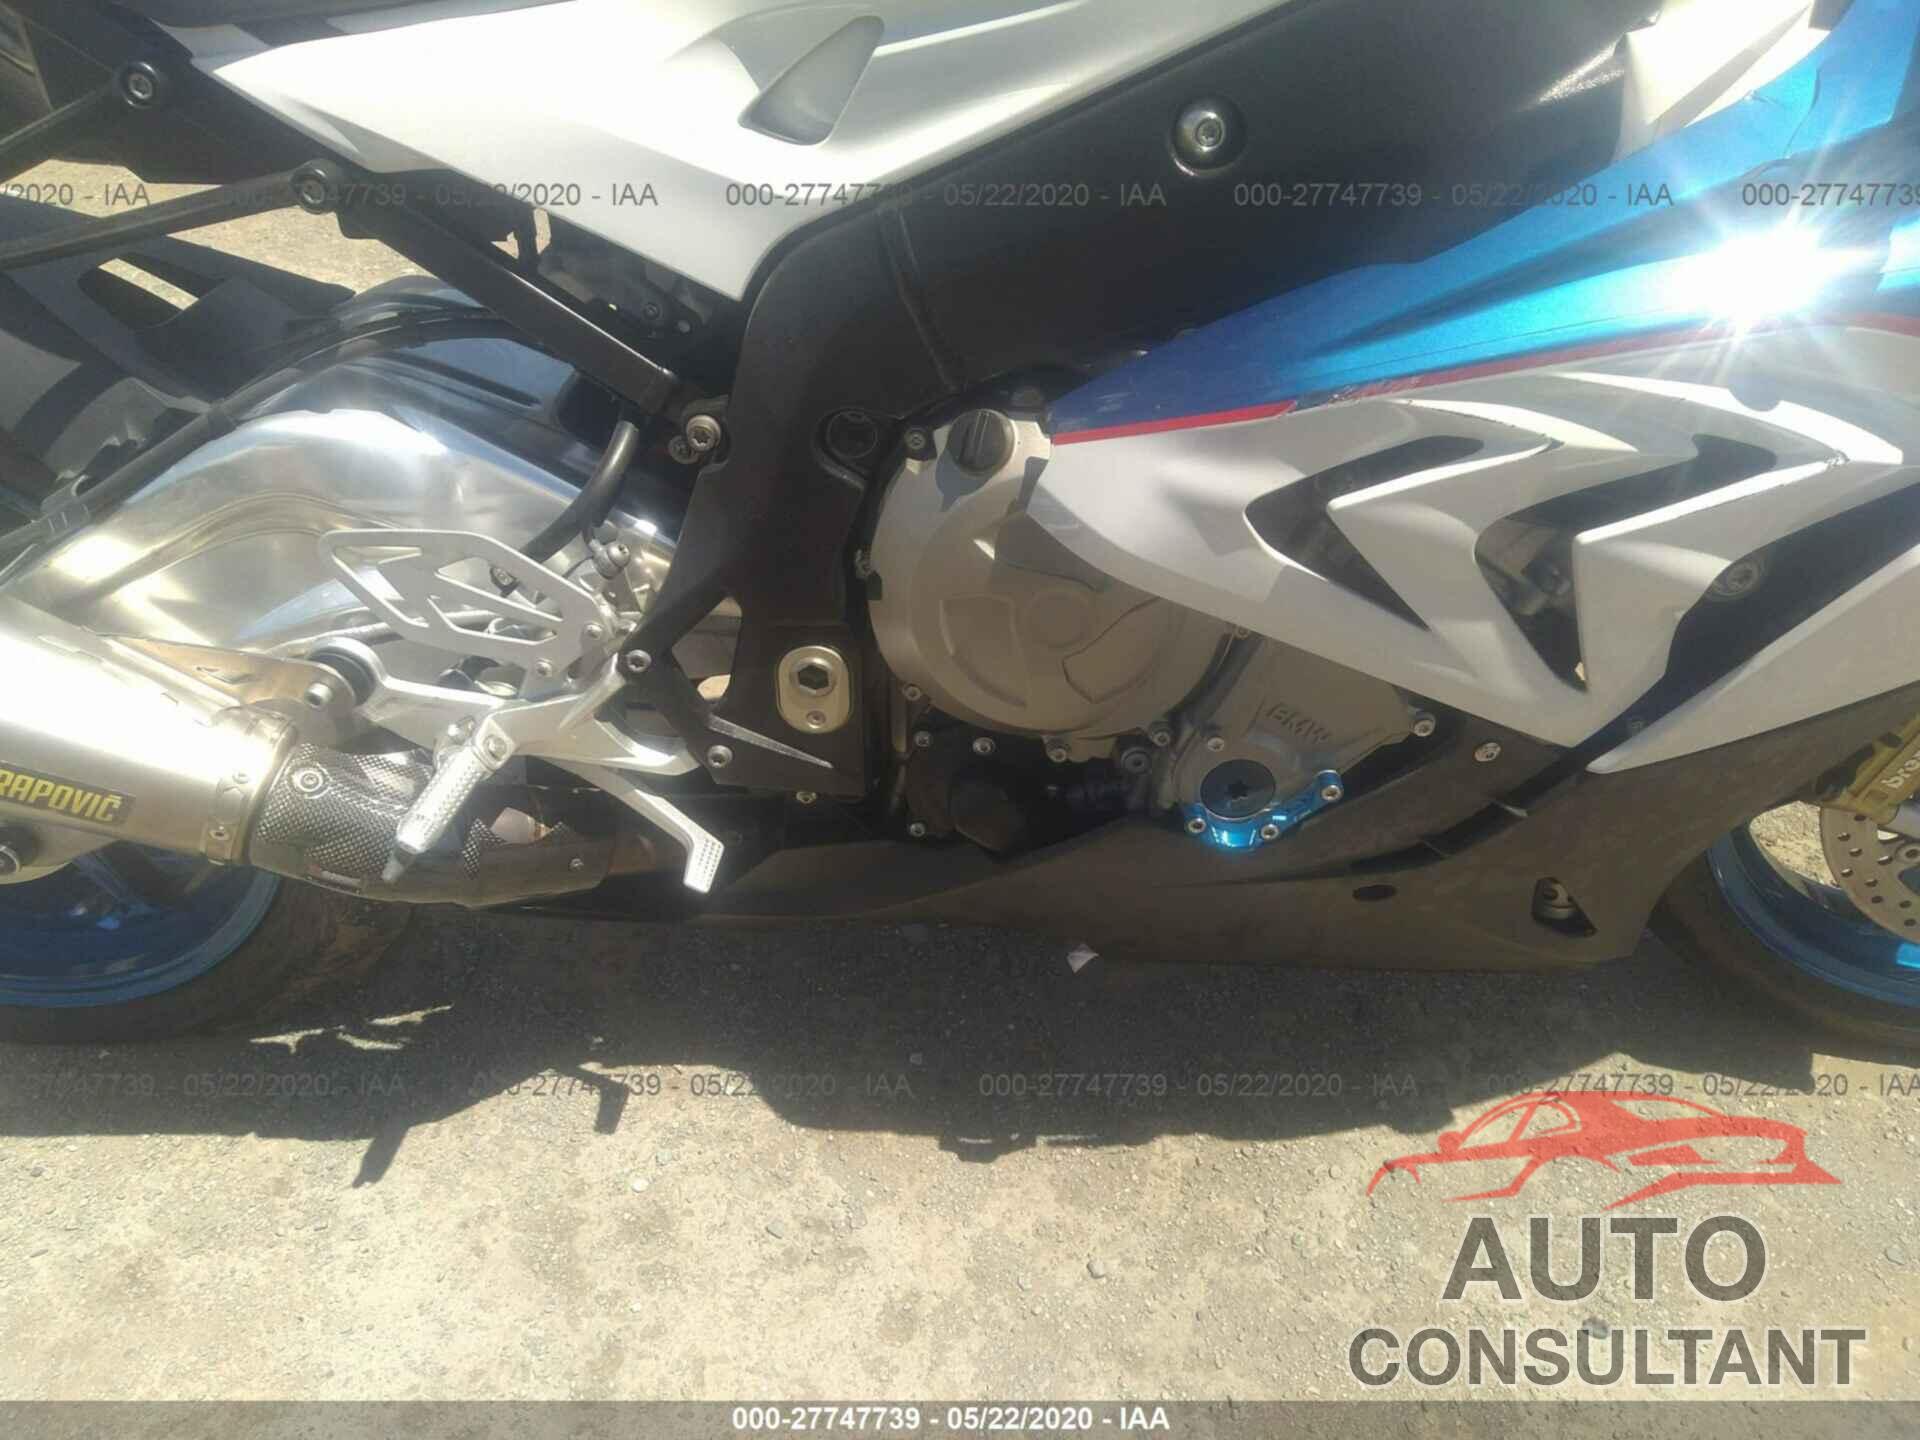 BMW S 1000 2016 - WB10D2100GZ354148